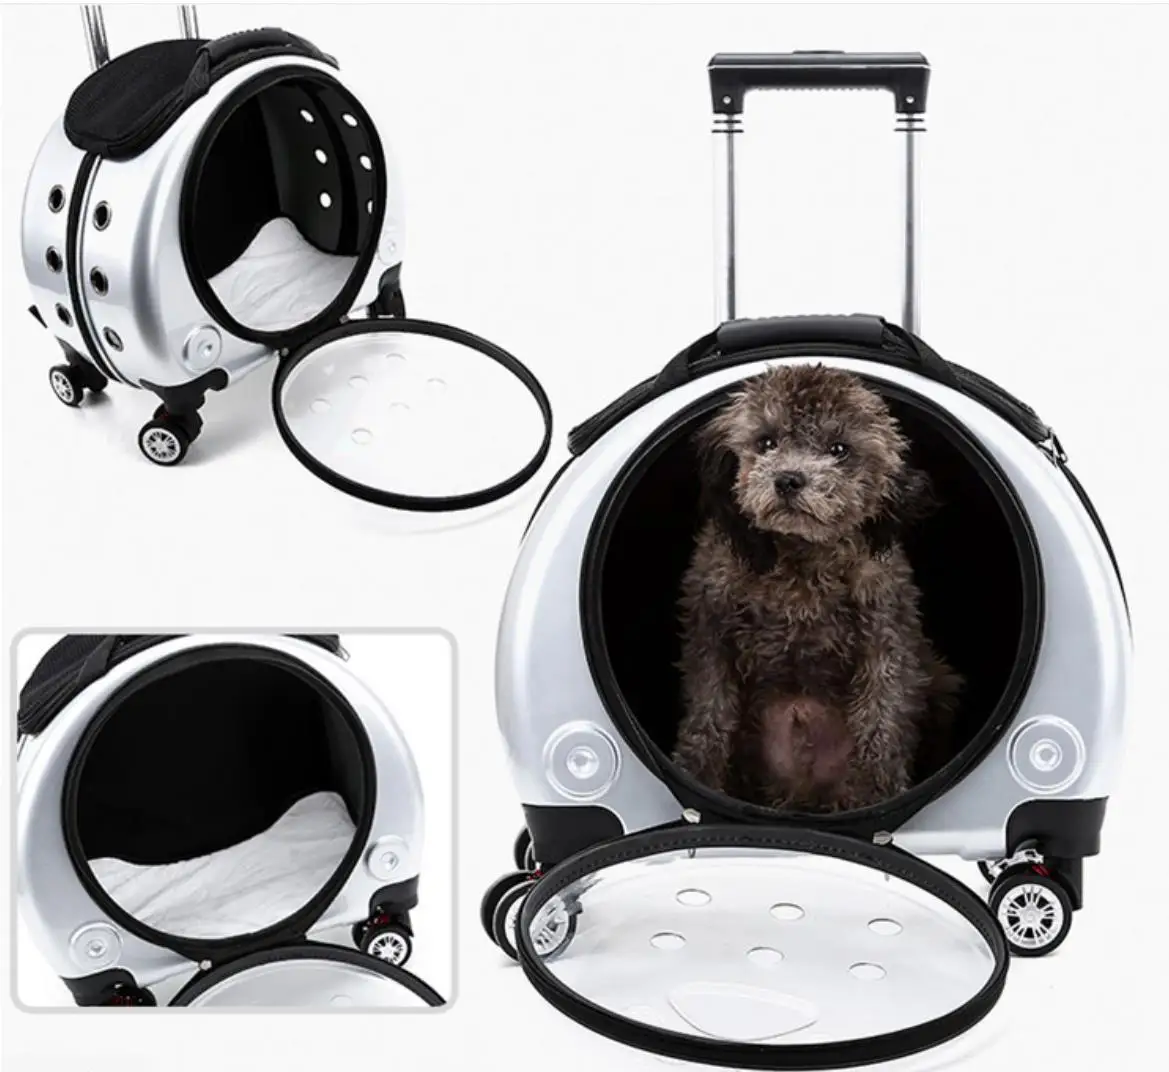 

2020 new luxury pet carrier on wheels transparent pet trolley backpack airline approved pet travel bag, 3 colors